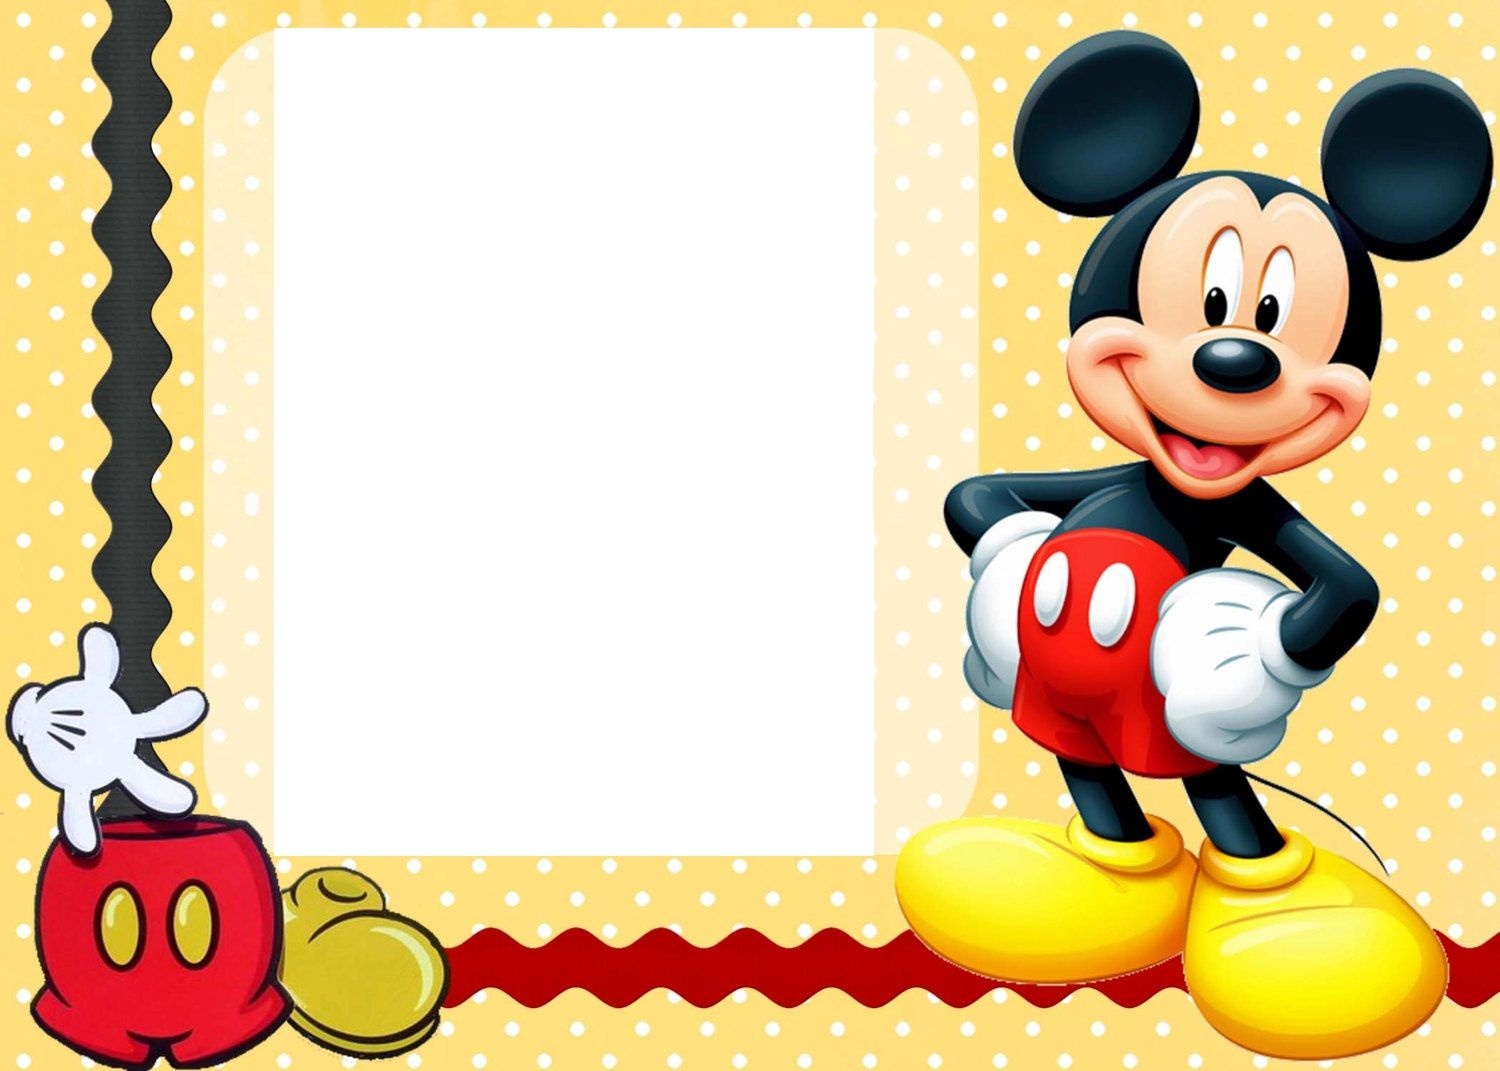 Mickey Mouse Clubhouse Invitation Template Free Download | Do It - Free Printable Mickey Mouse Invitations